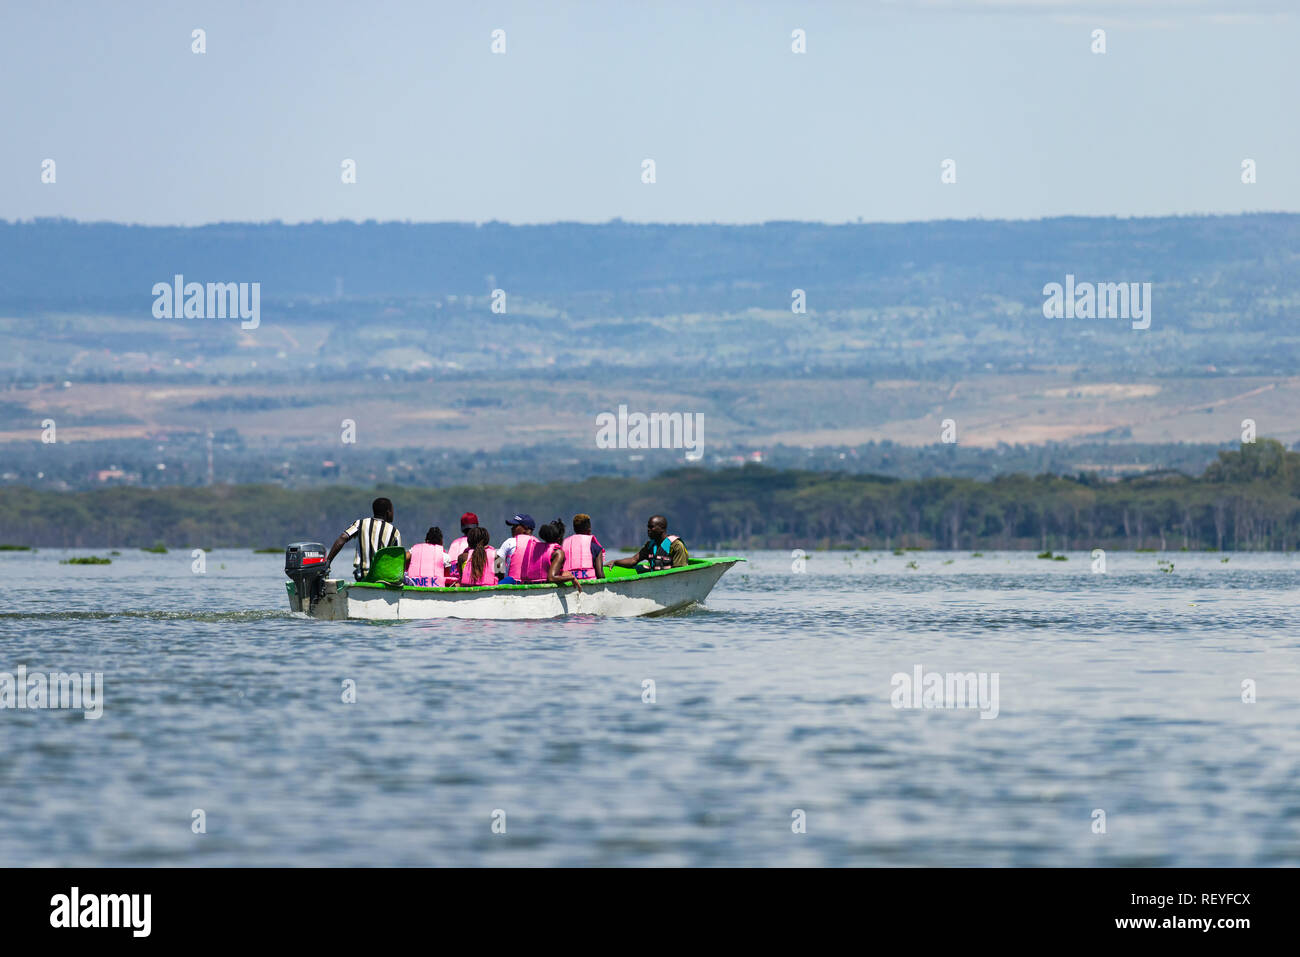 A group of African men and women taking an excursion in a fibreglass motorboat on Lake Naivasha, Kenya Stock Photo